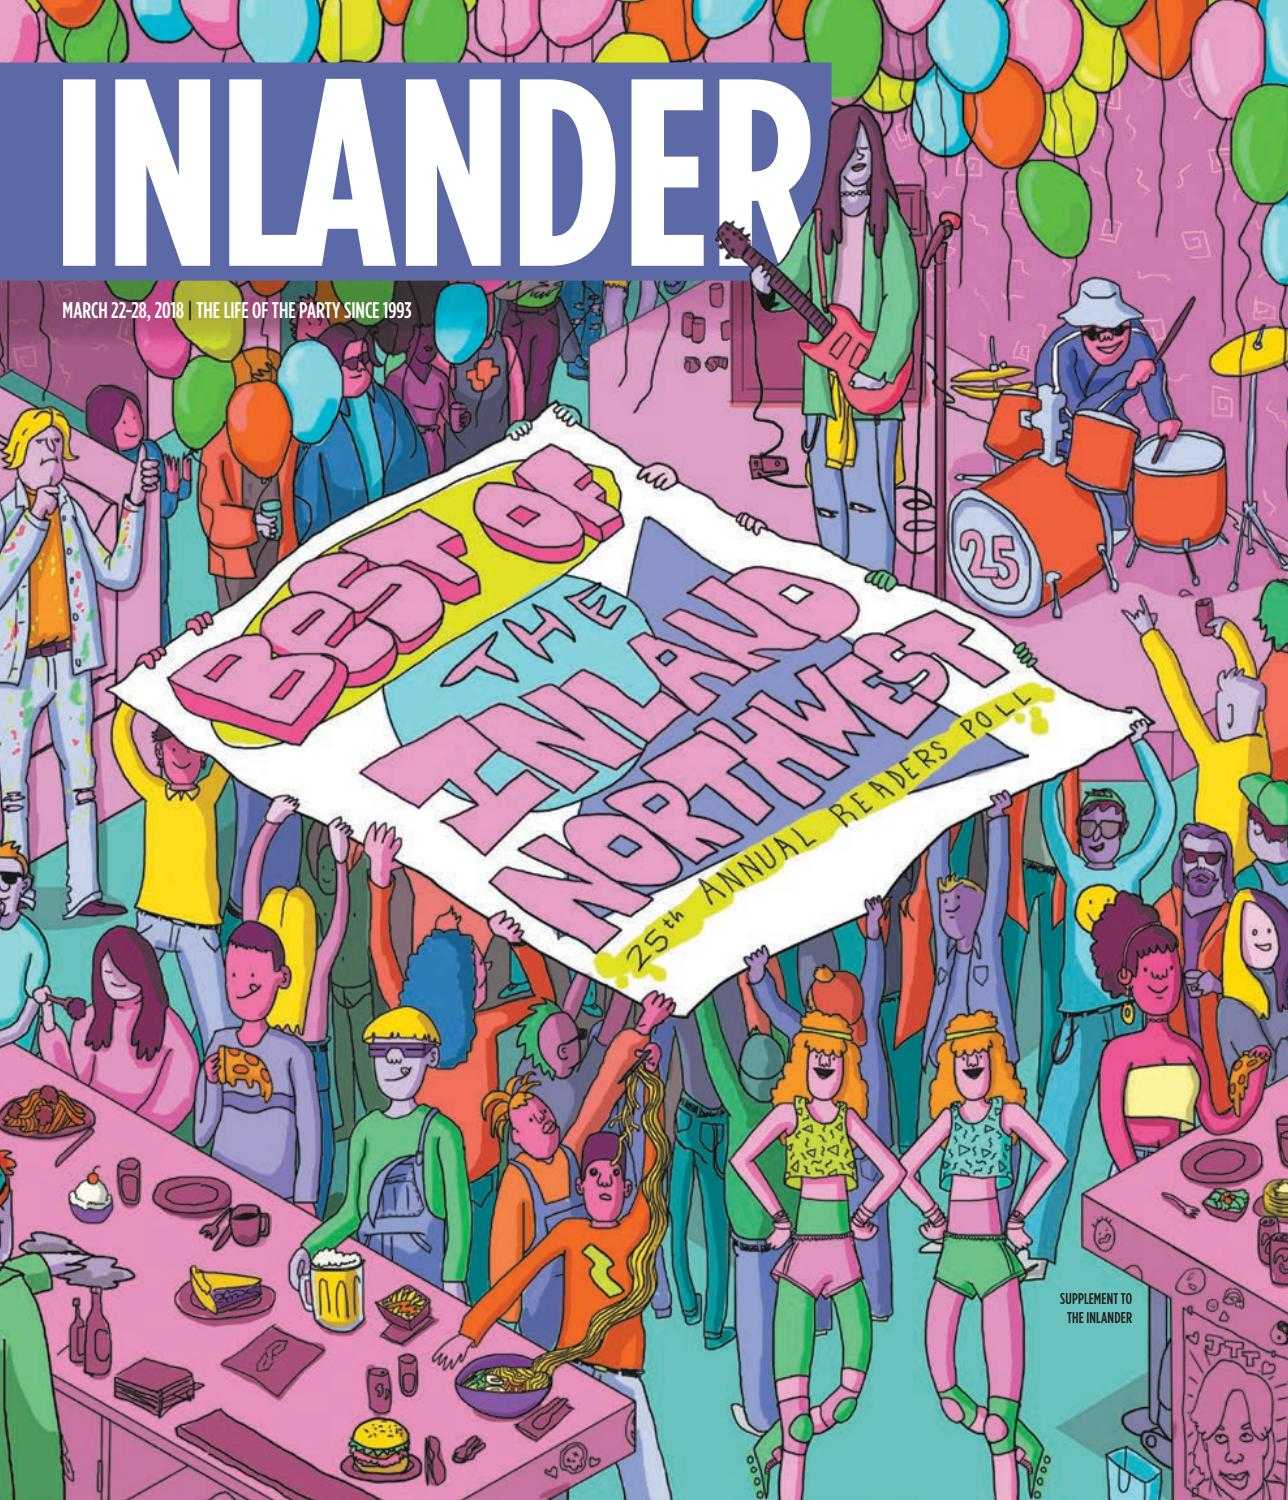 Bowling for Columbine Worksheet Answers and Inlander 03 22 2018 by the Inlander issuu